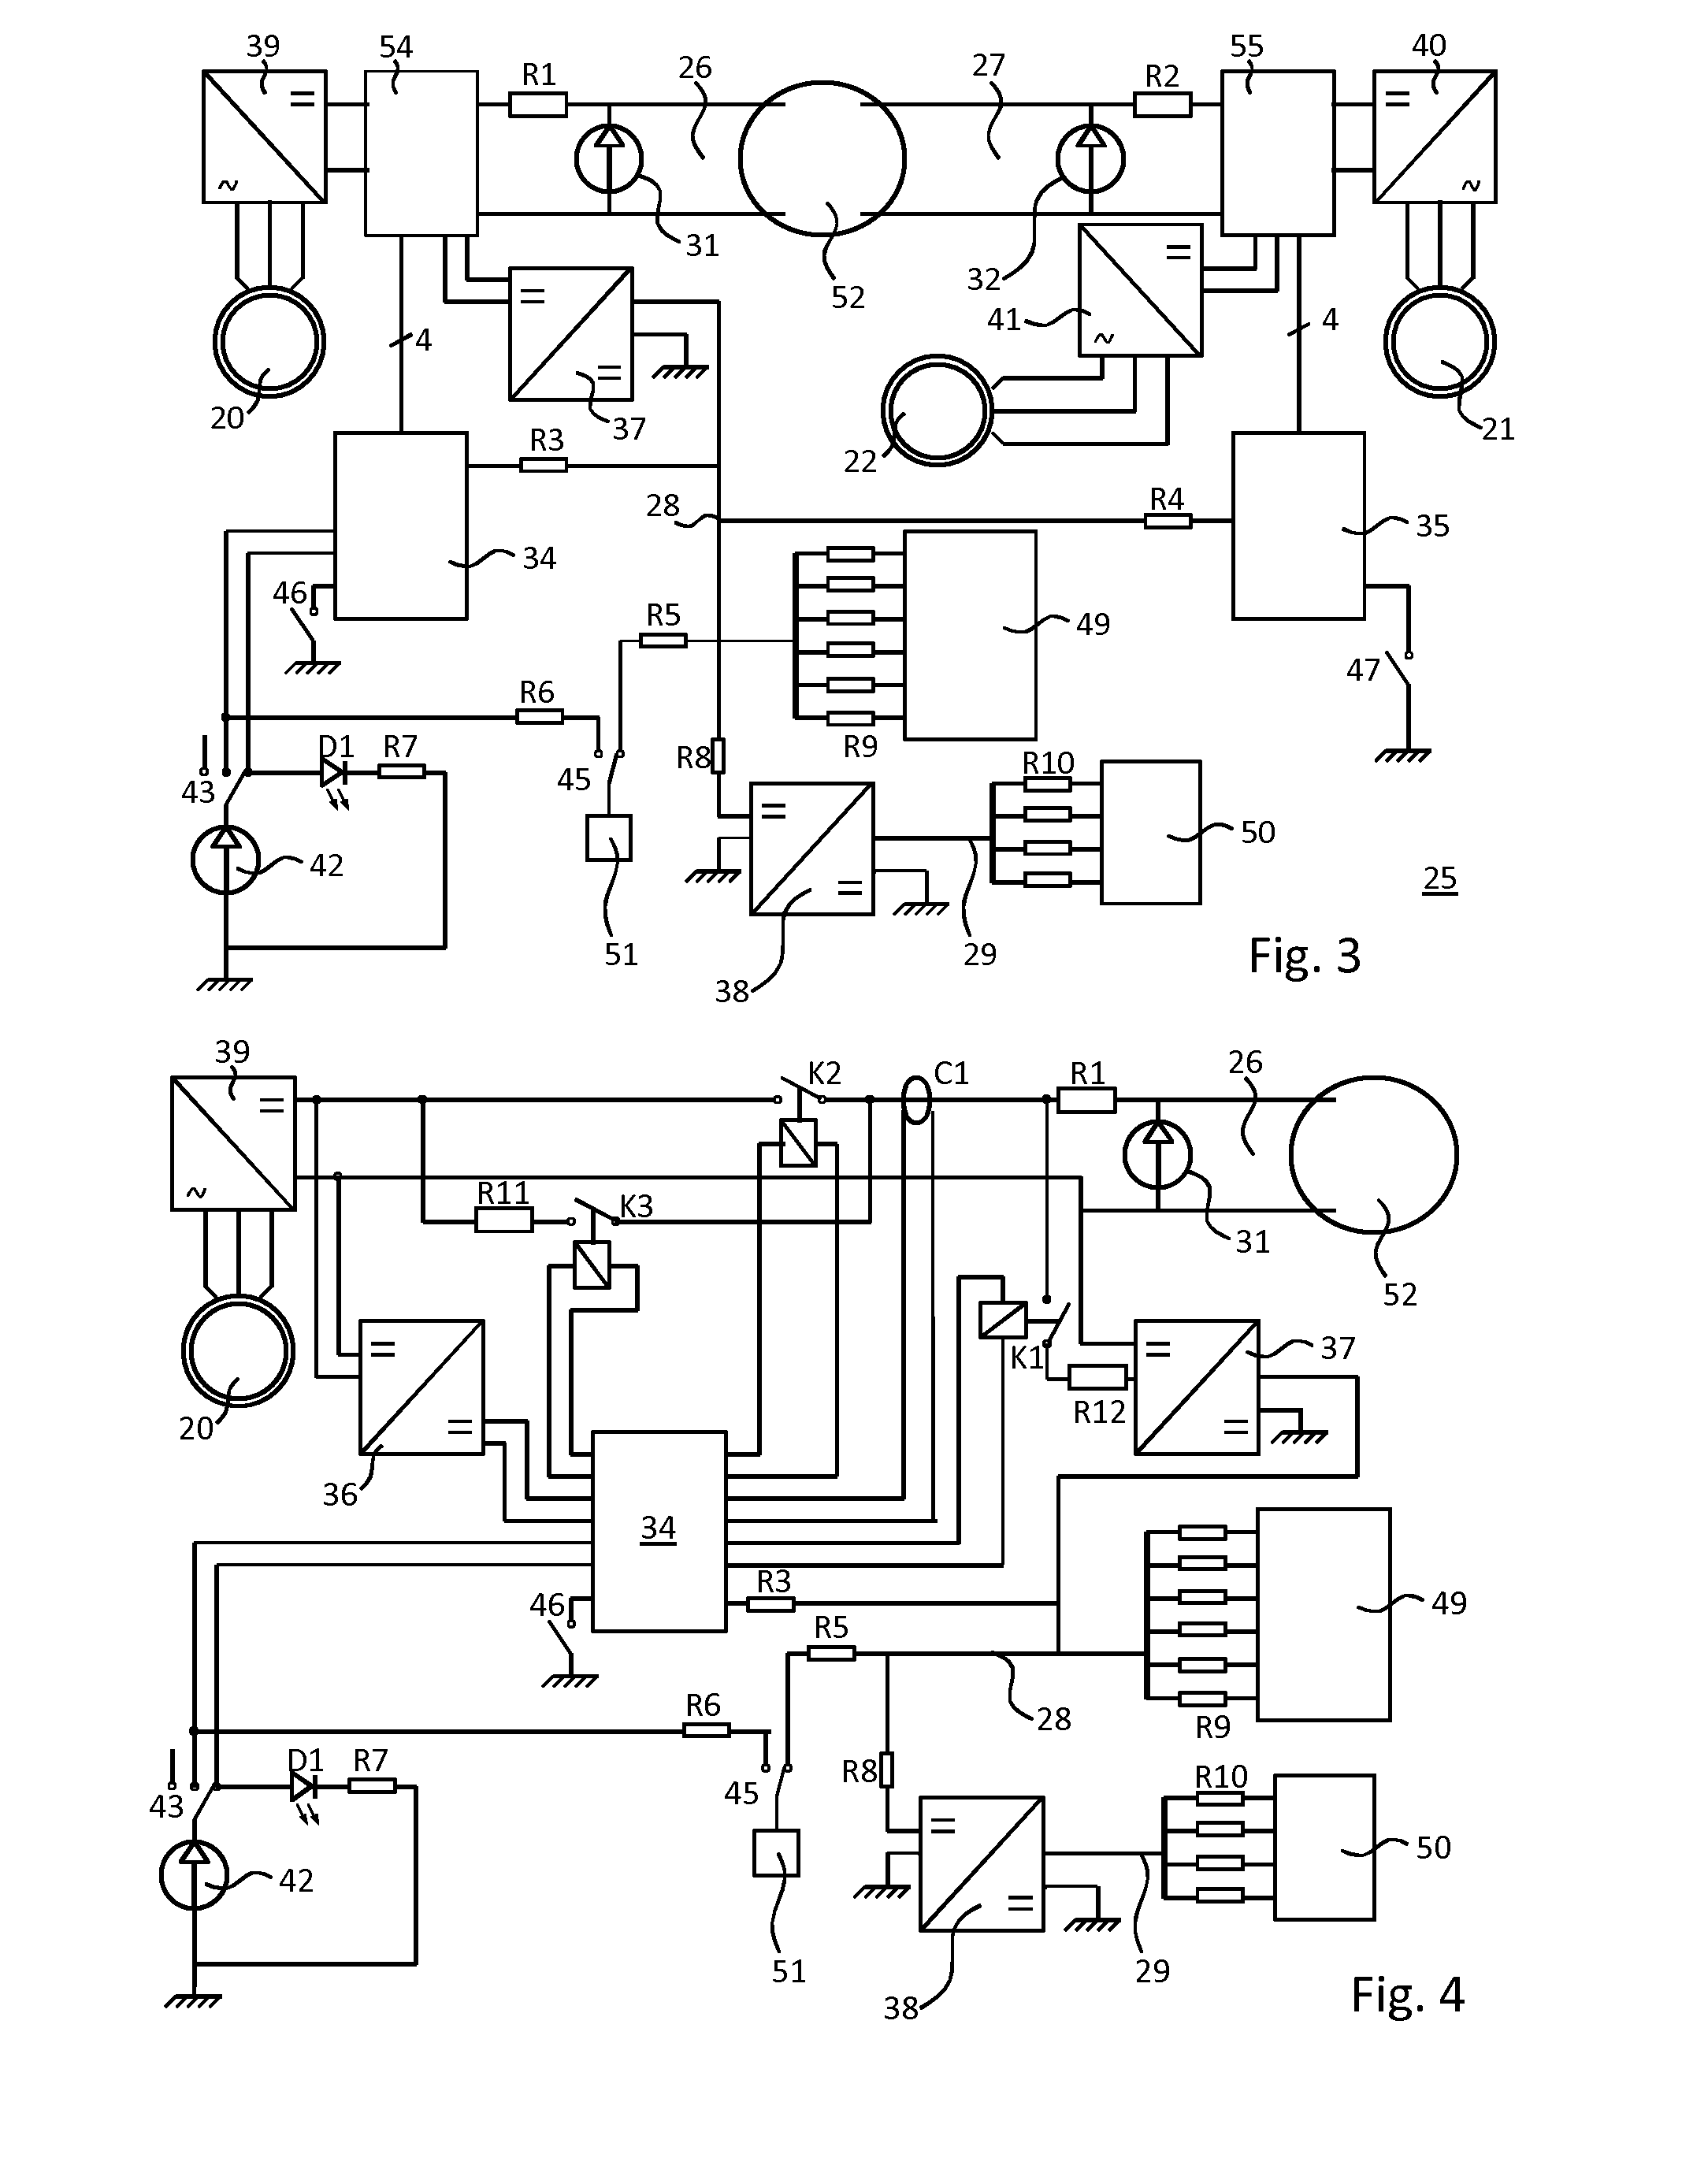 Electrical power supply device for aircraft with electric propulsion